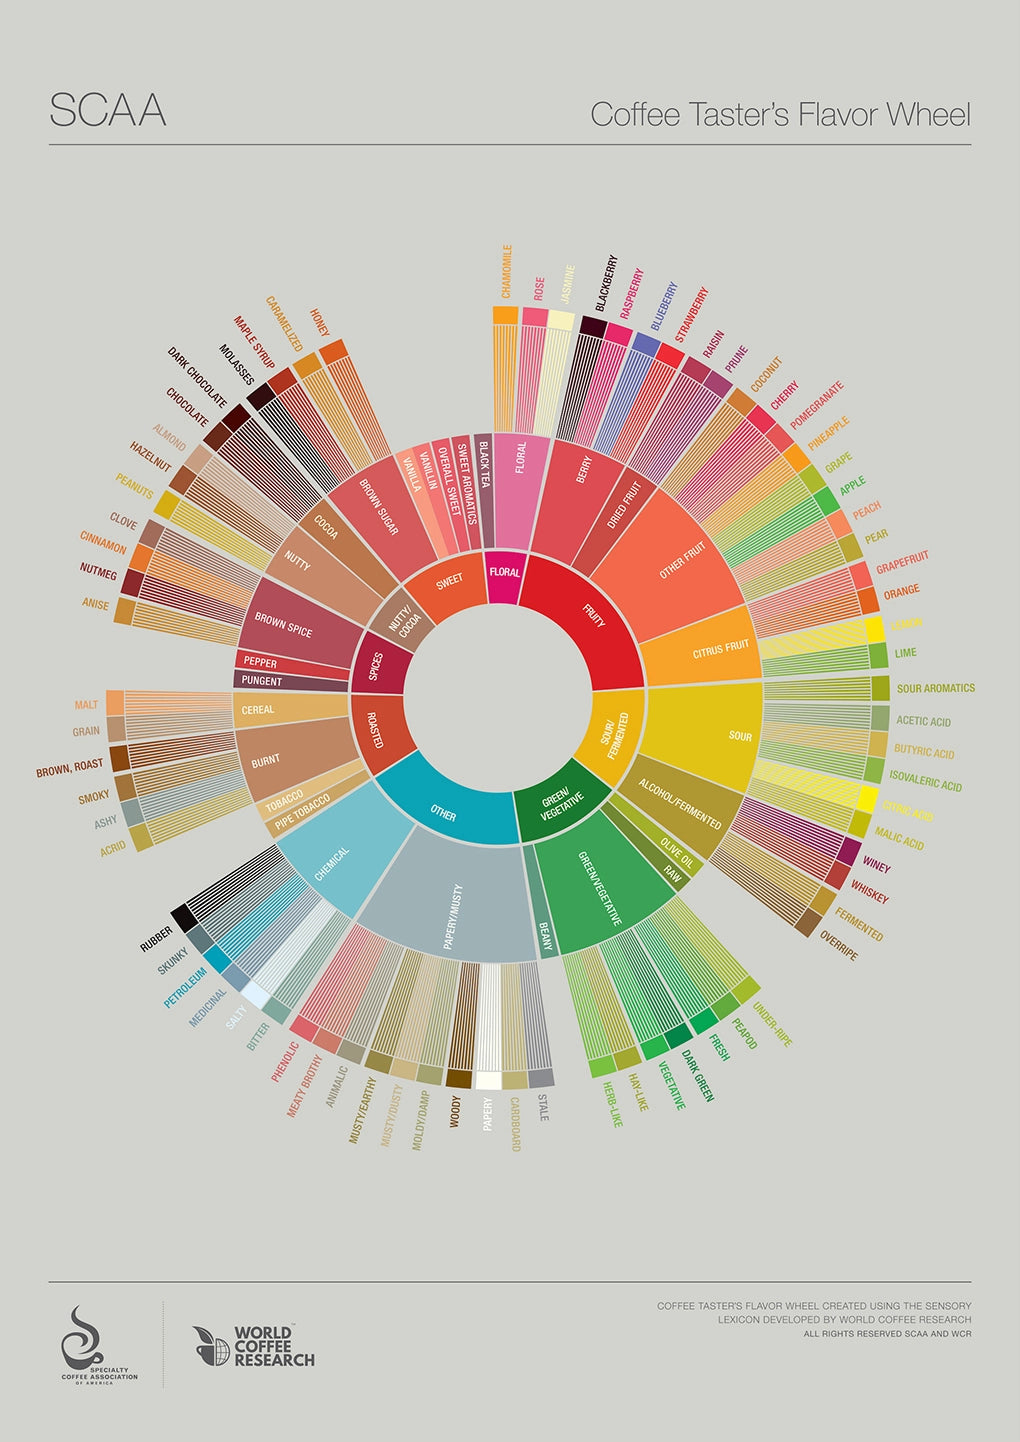 Coffee Taster's Flavor Wheel from the Specialty Coffee Association of America (SCAA) and World Coffee Research (WCR). CC BY NC ND 4.0